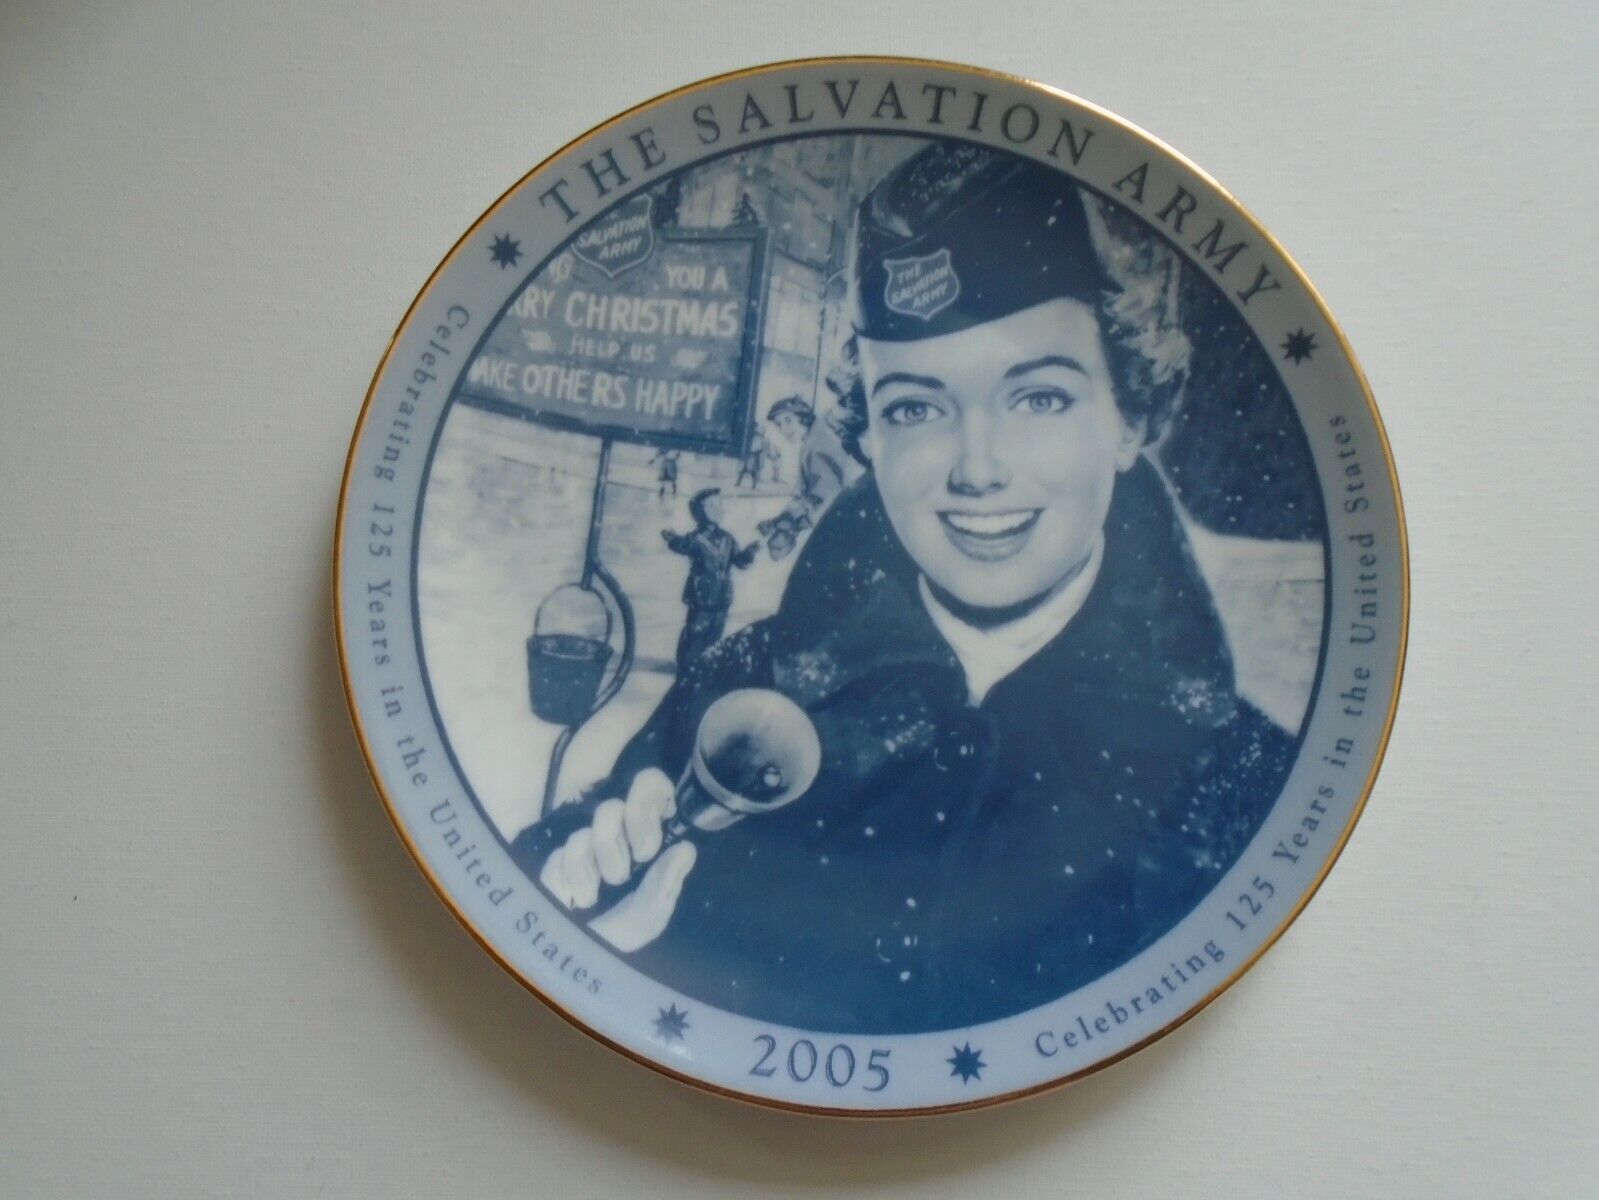 The Salvation Army Christmas 2005 Plate